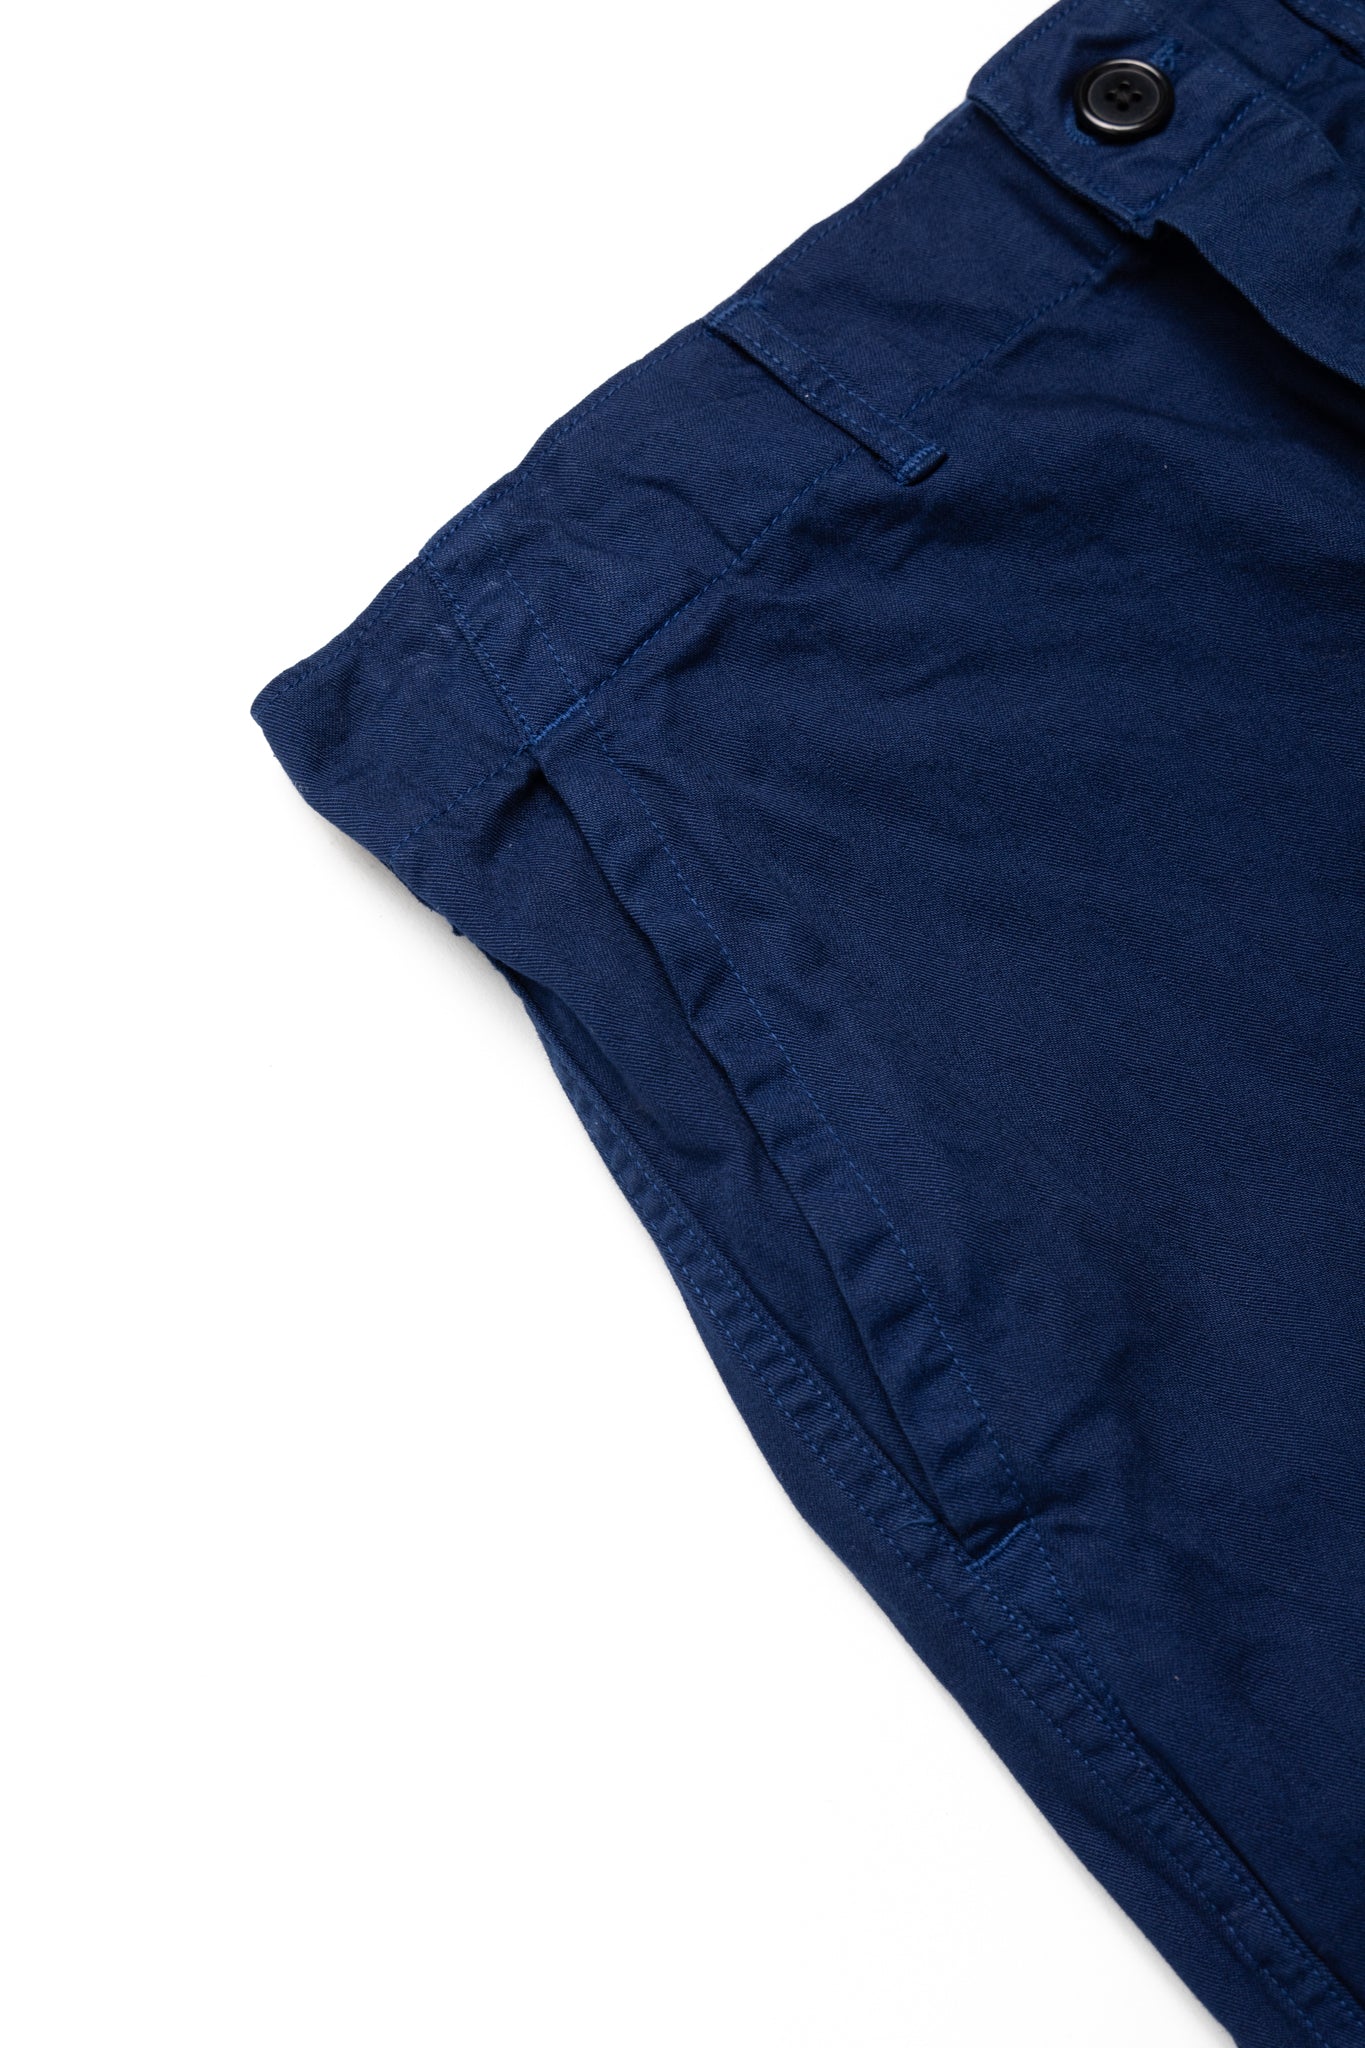 French Work Pants - Blue